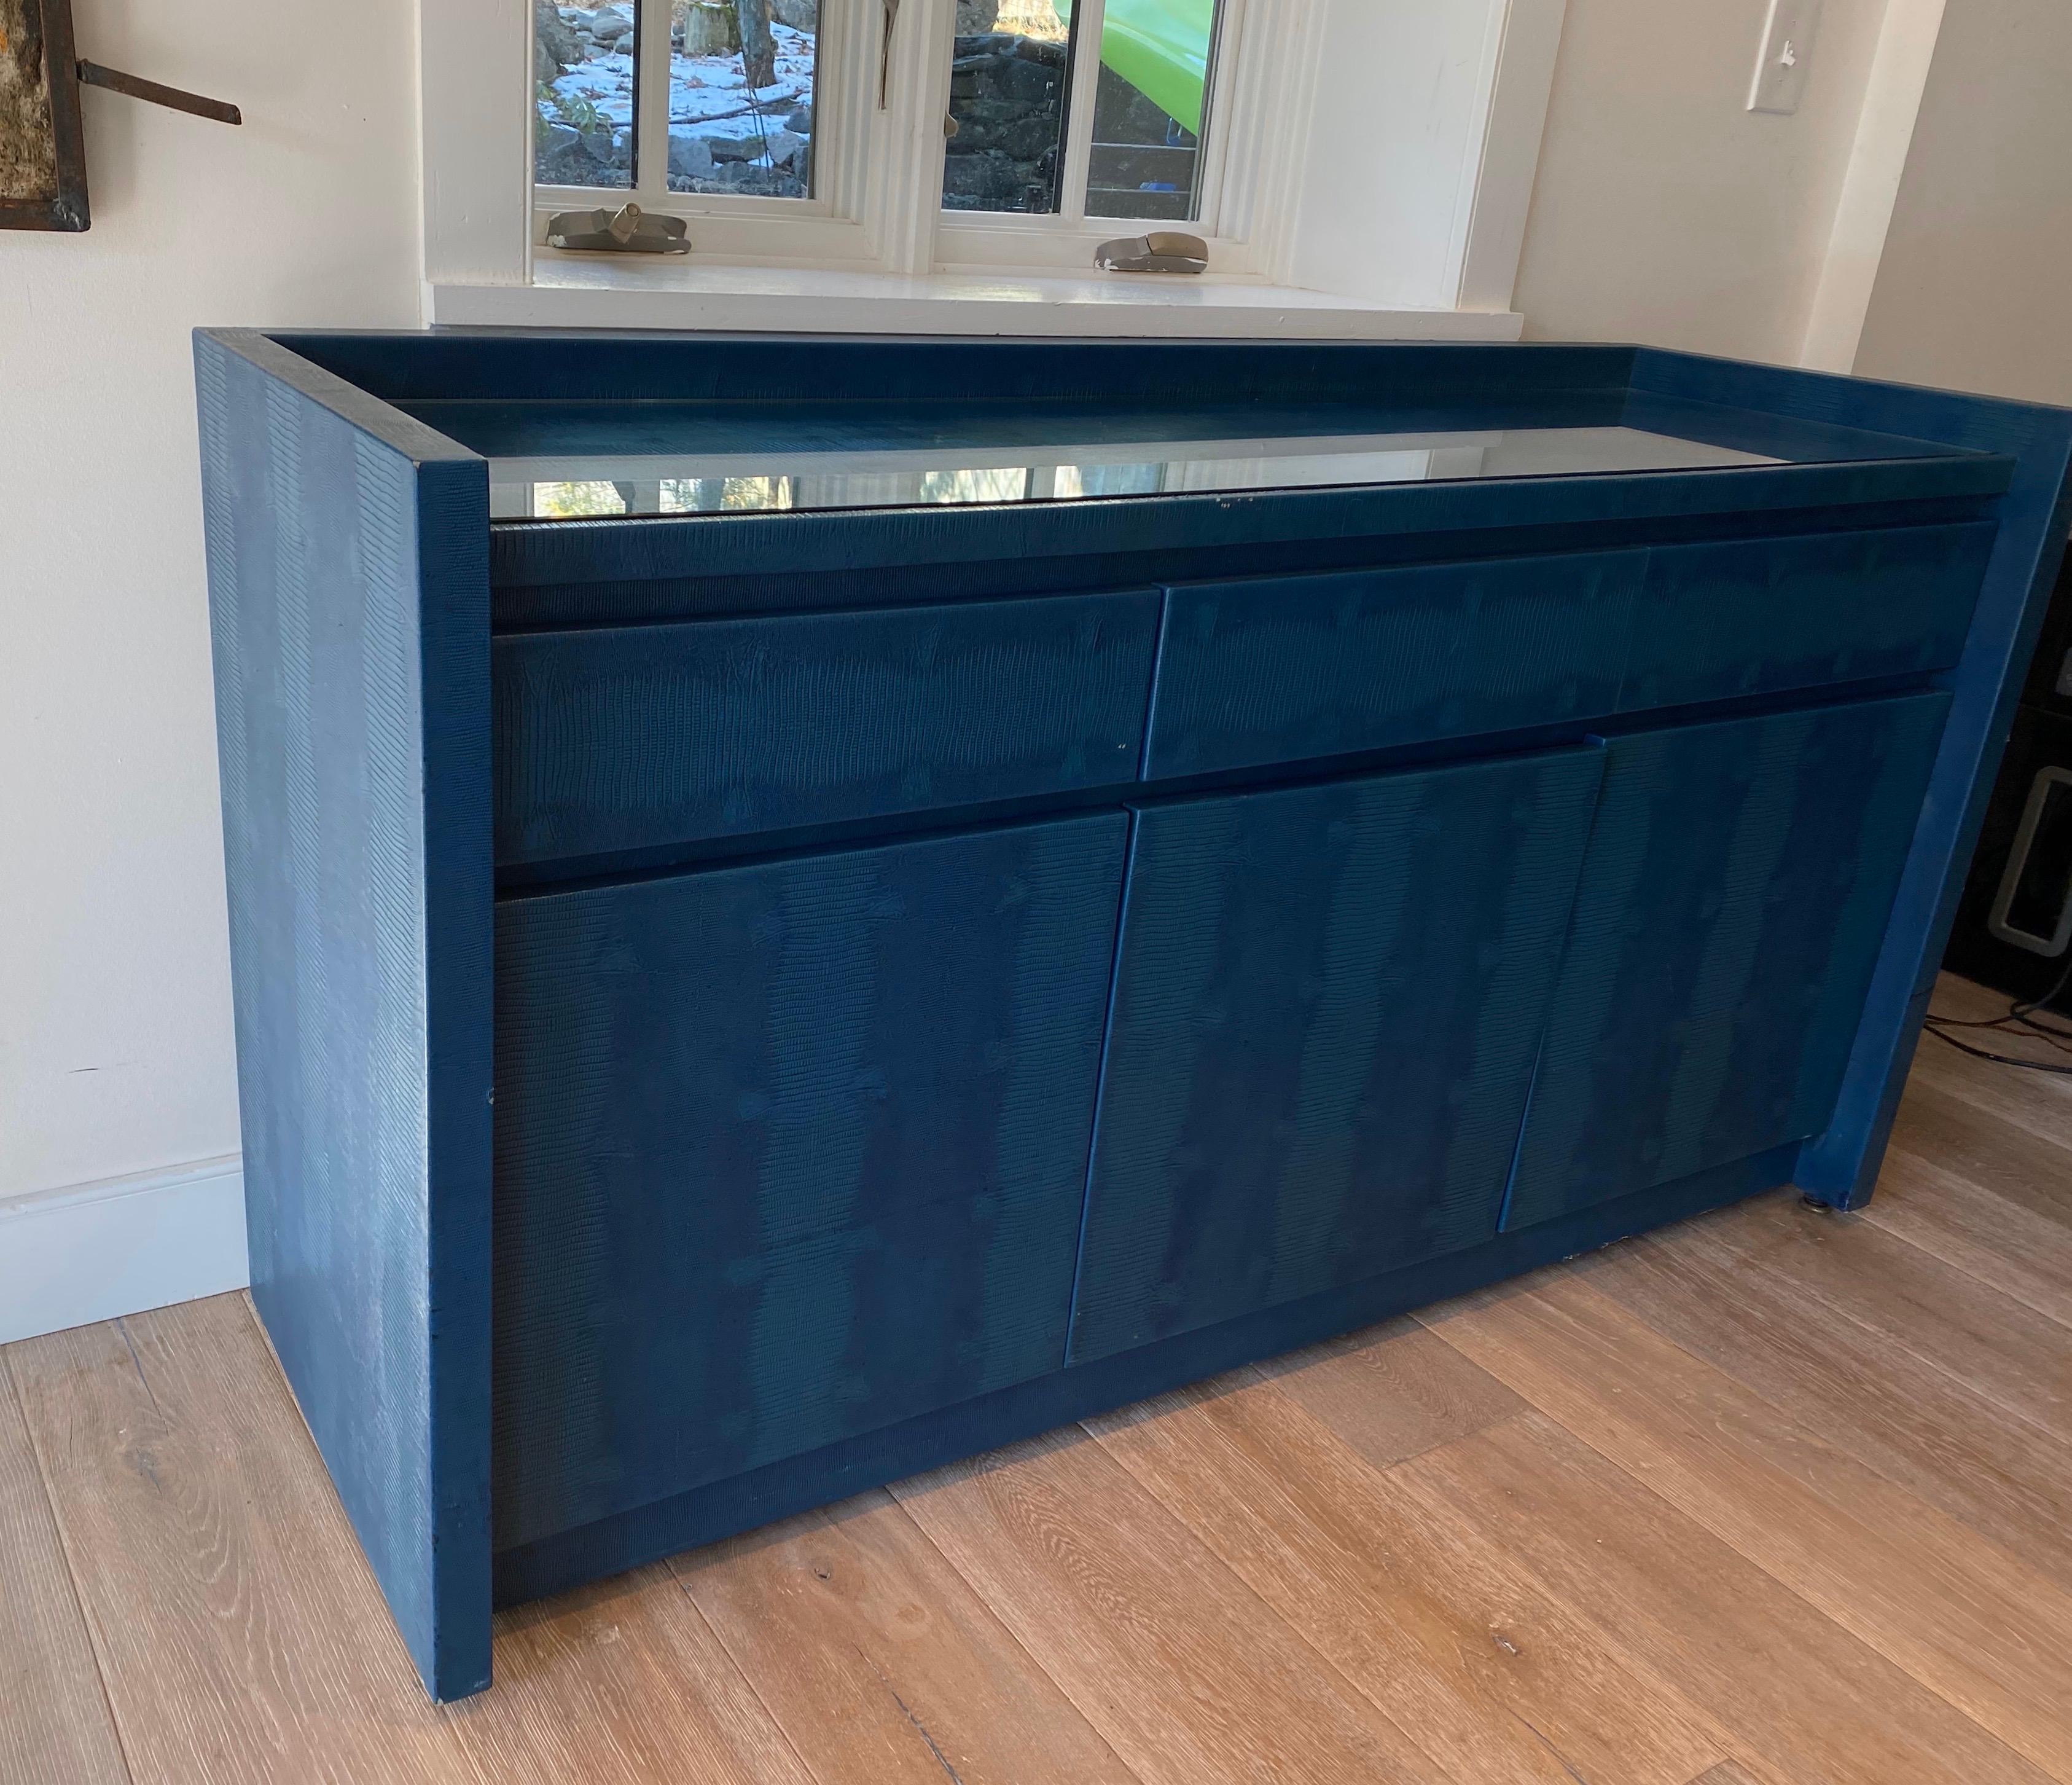 Stunning and rare Karl springer deep blue/ teal lizard skin sideboard. Three lower doors with two shelves and three felt lined drawers above. Complete with inset glass top. The piece is wrapped completely front to back. Signed with leather tab.